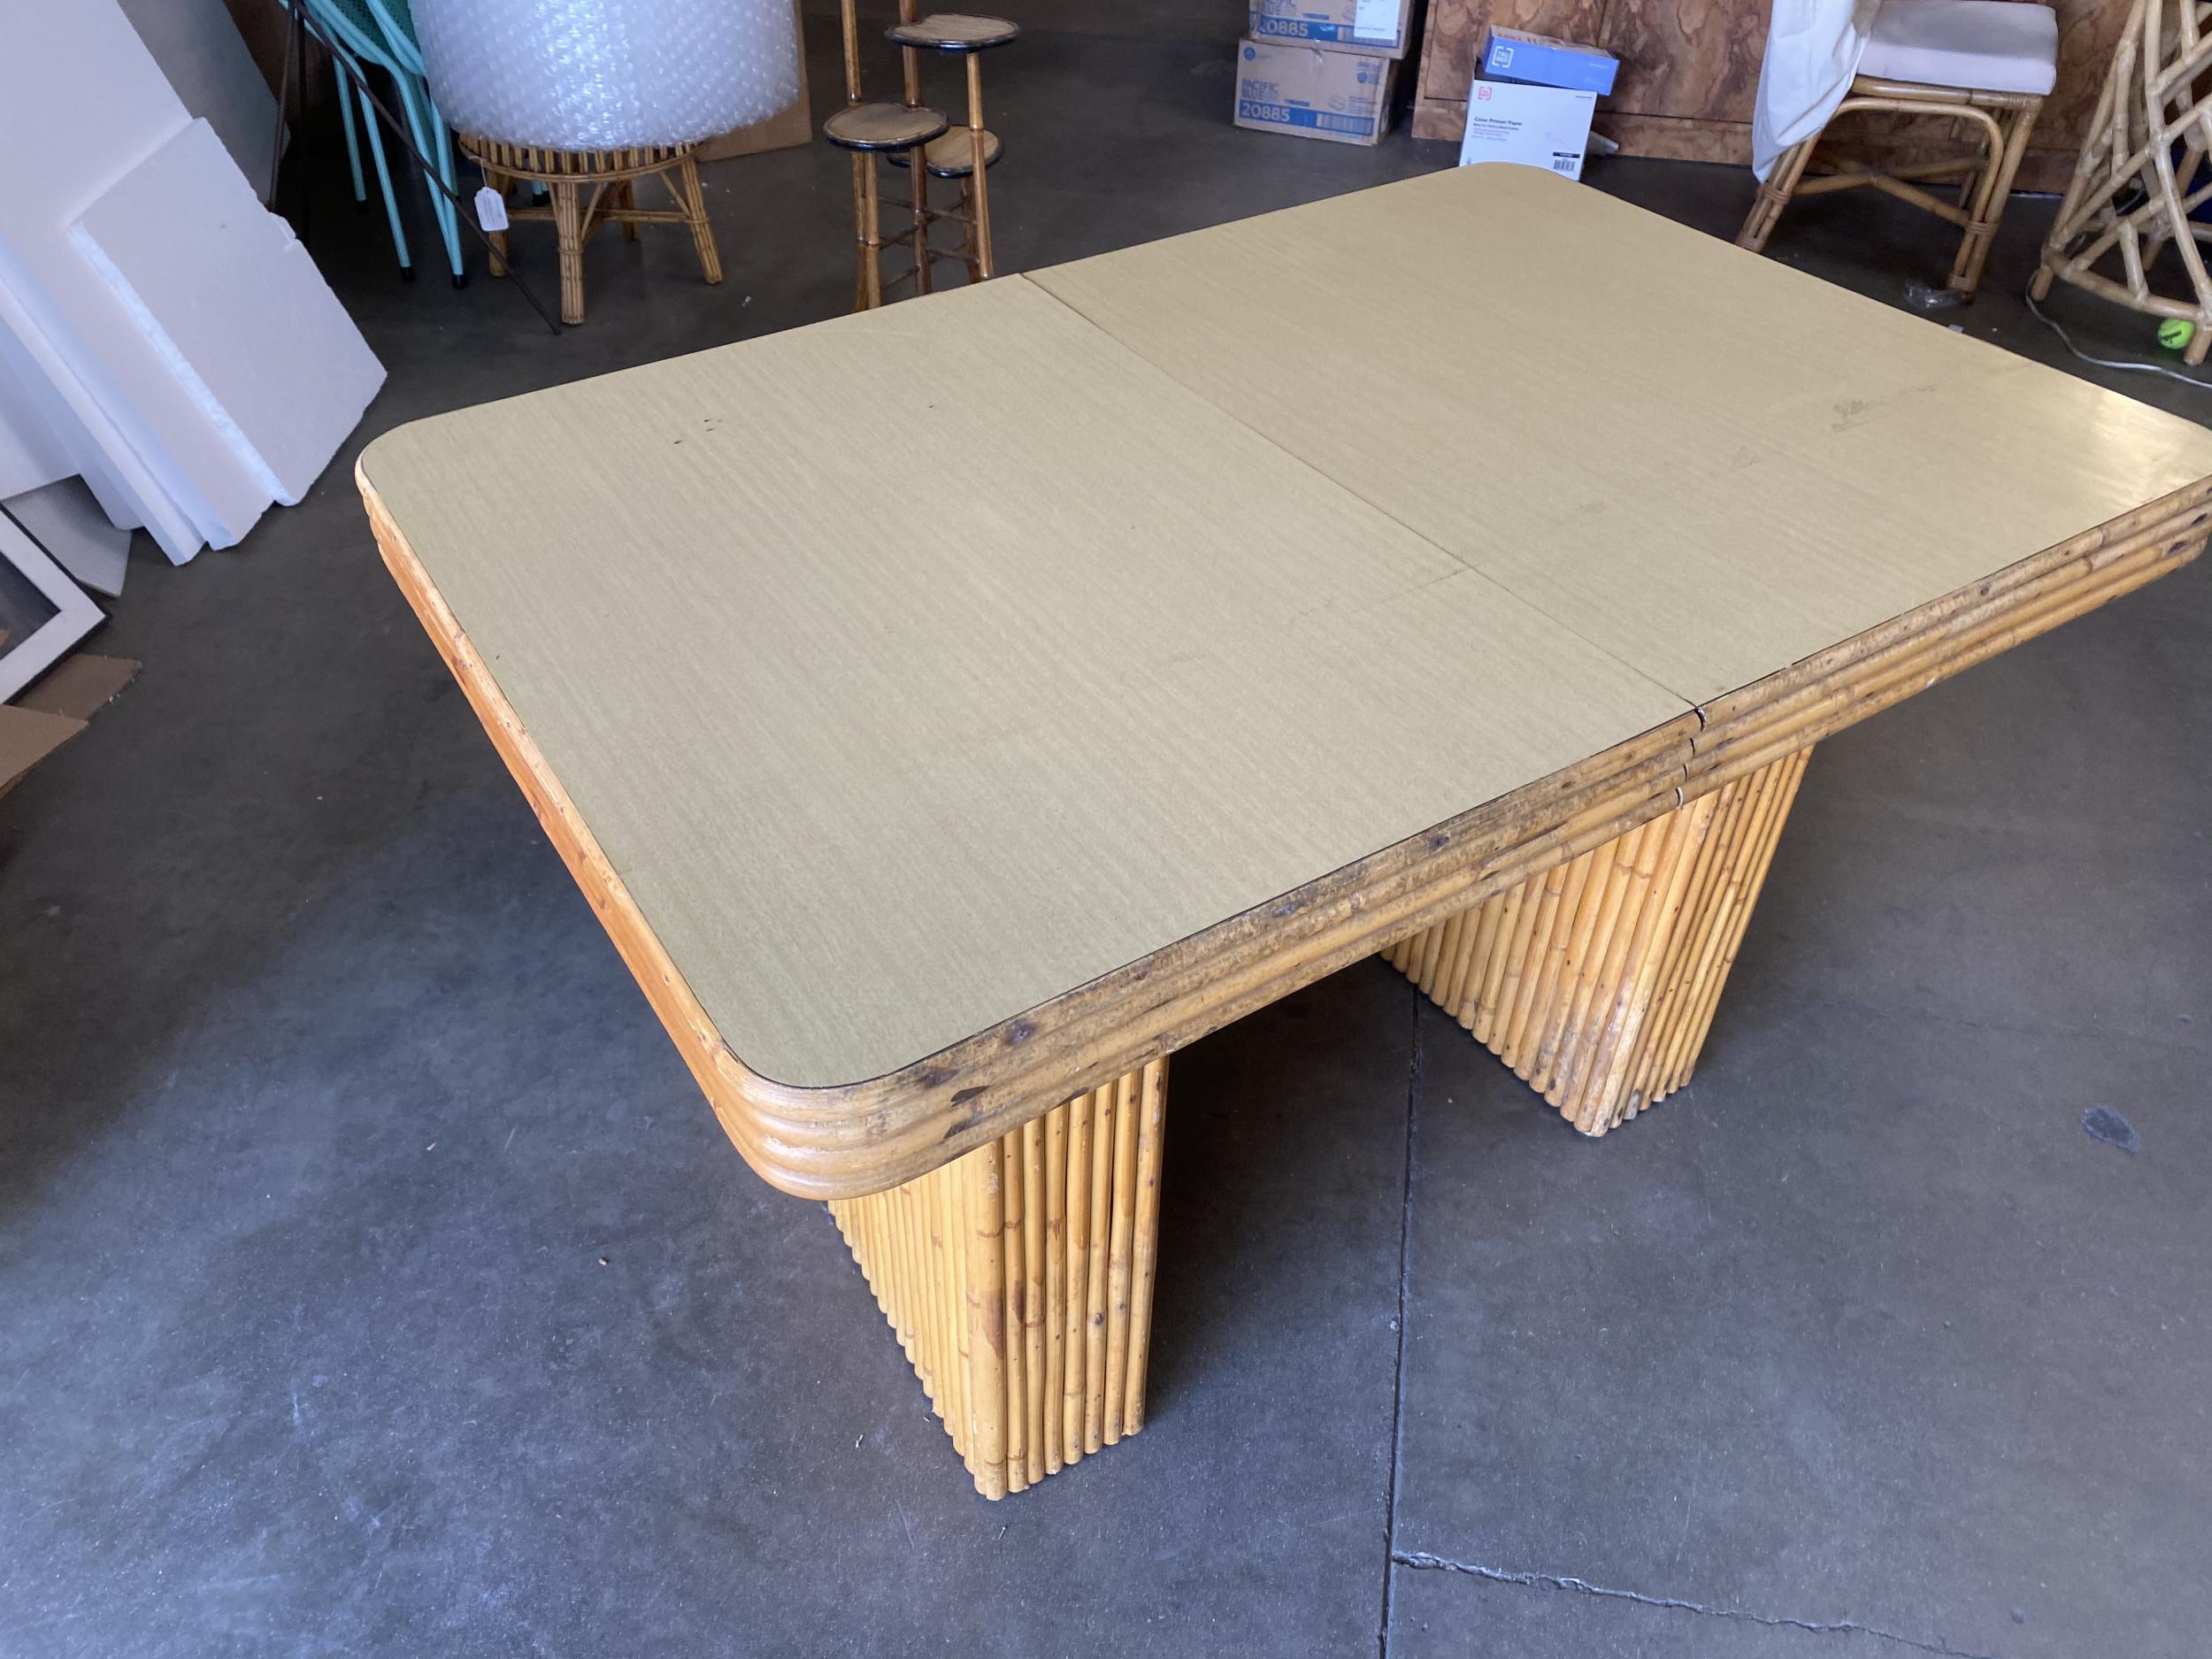 Midcentury six-person rattan dining table with vertically stacked rattan base legs, horizontal stacked rattan trim, and blond Formica mahogany table.

Measures: Table: 29.5